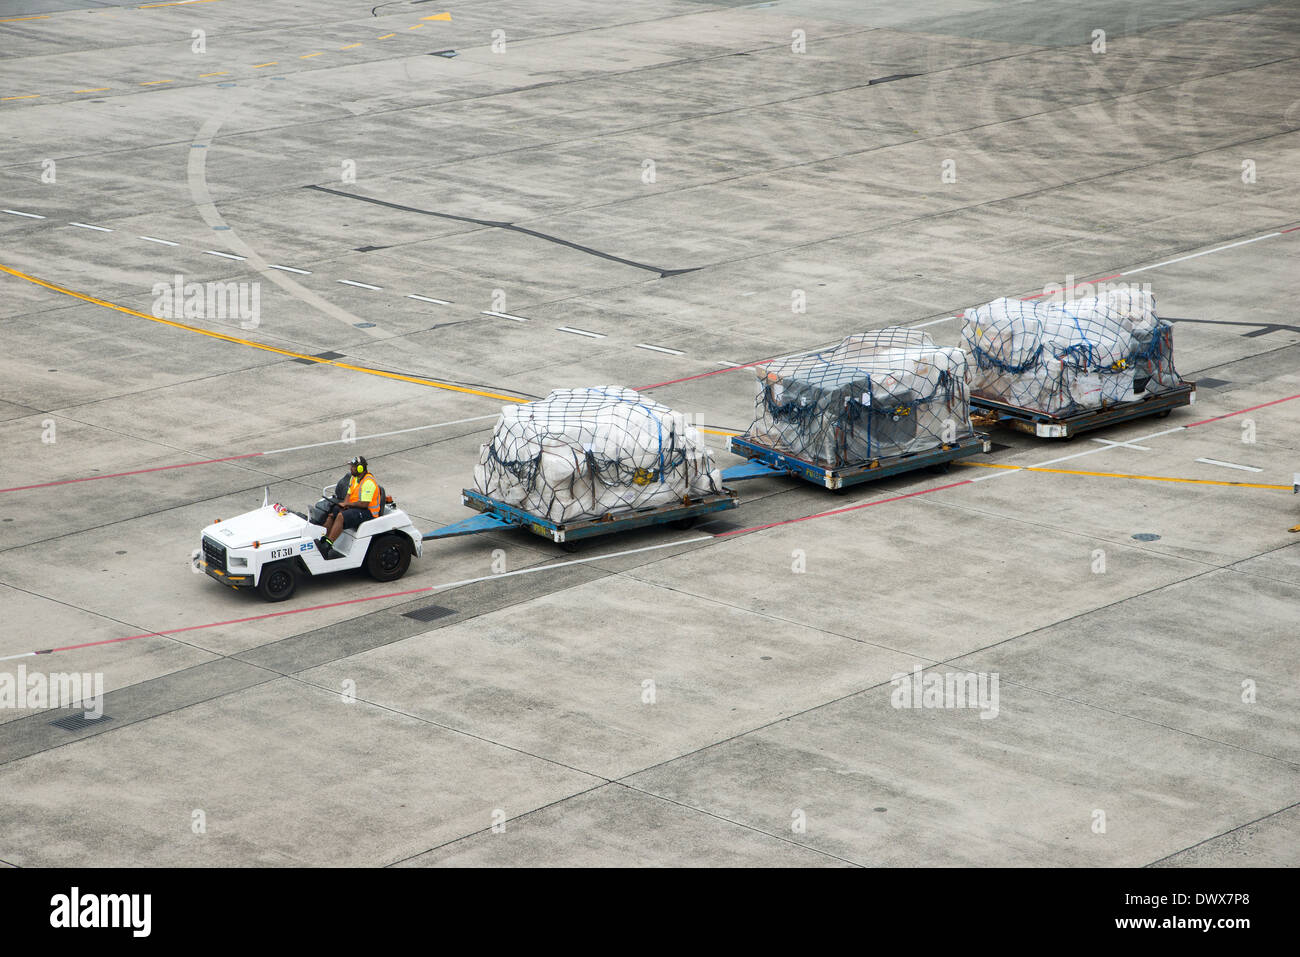 Airport cargo and freight handling truck at Auckland International Airport New Zealand Stock Photo